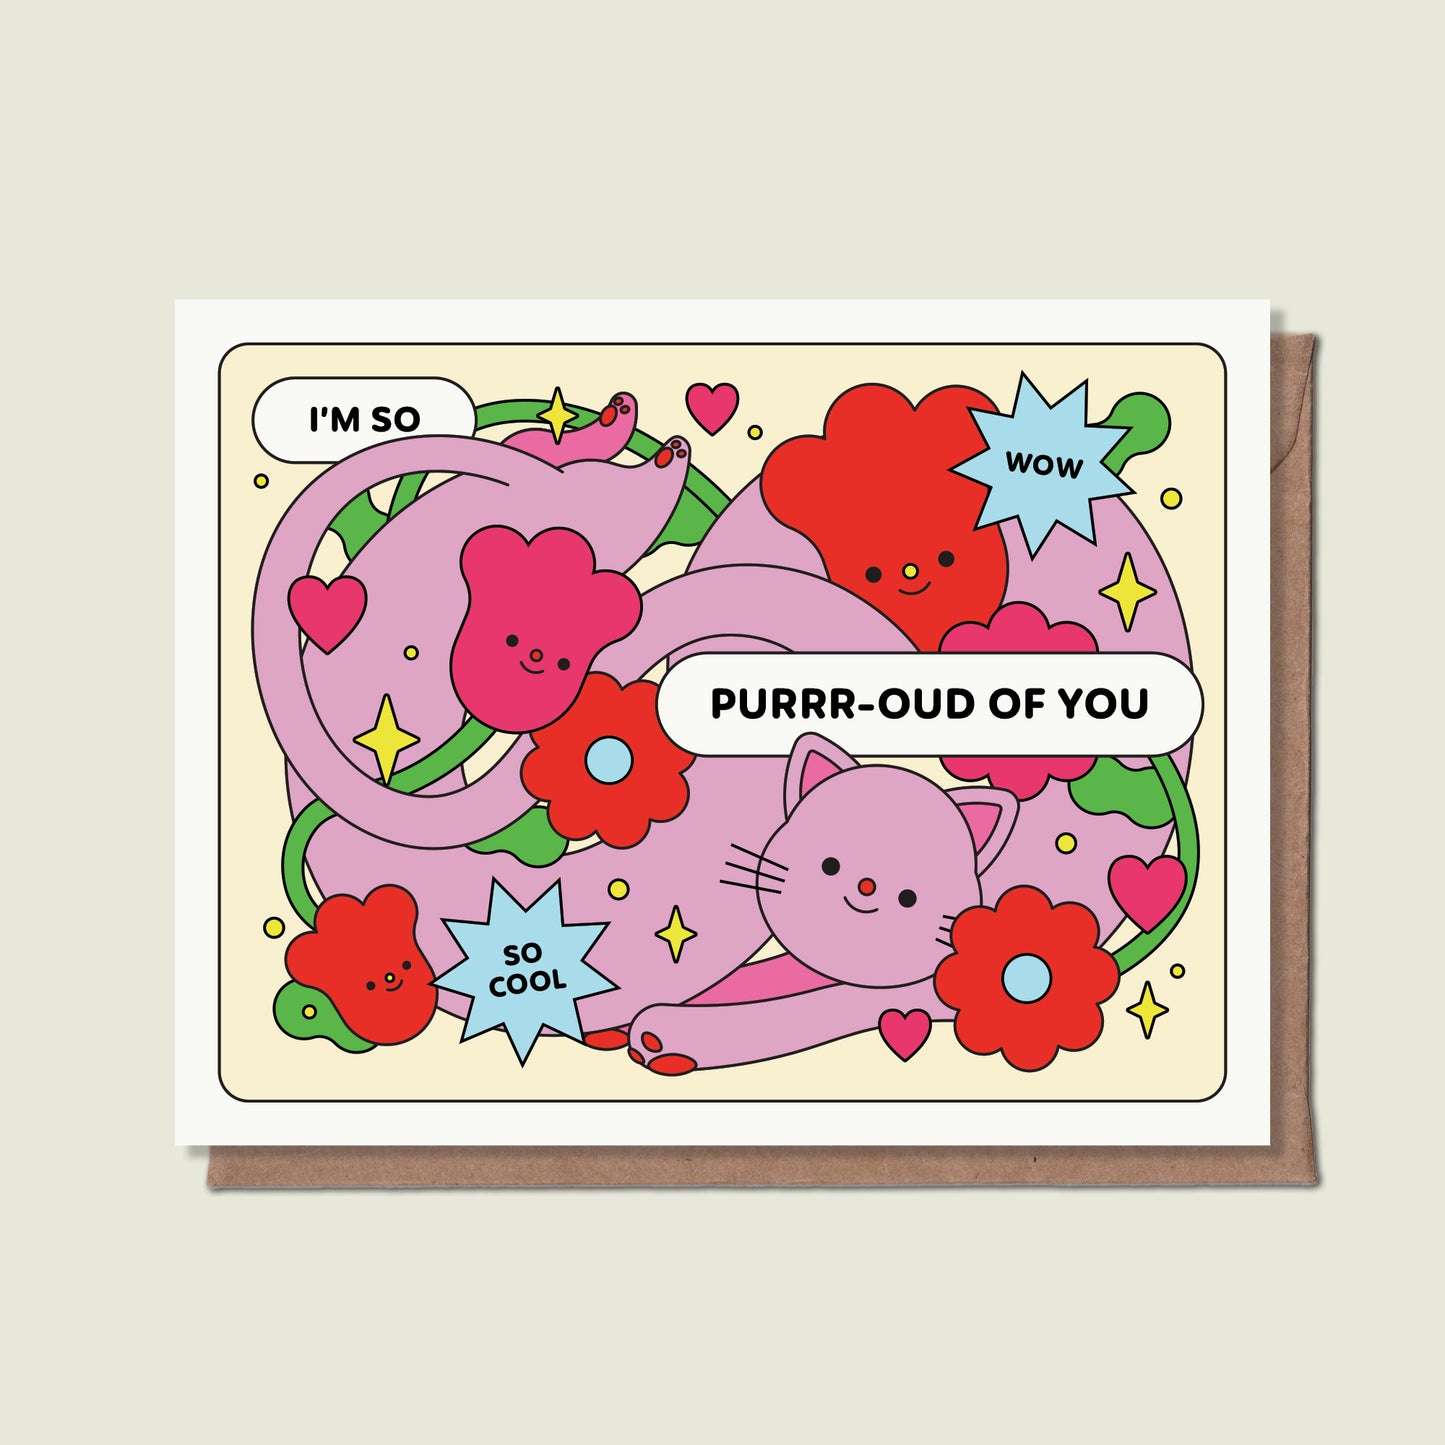 I'm So Purrr-oud Of You Greeting Card